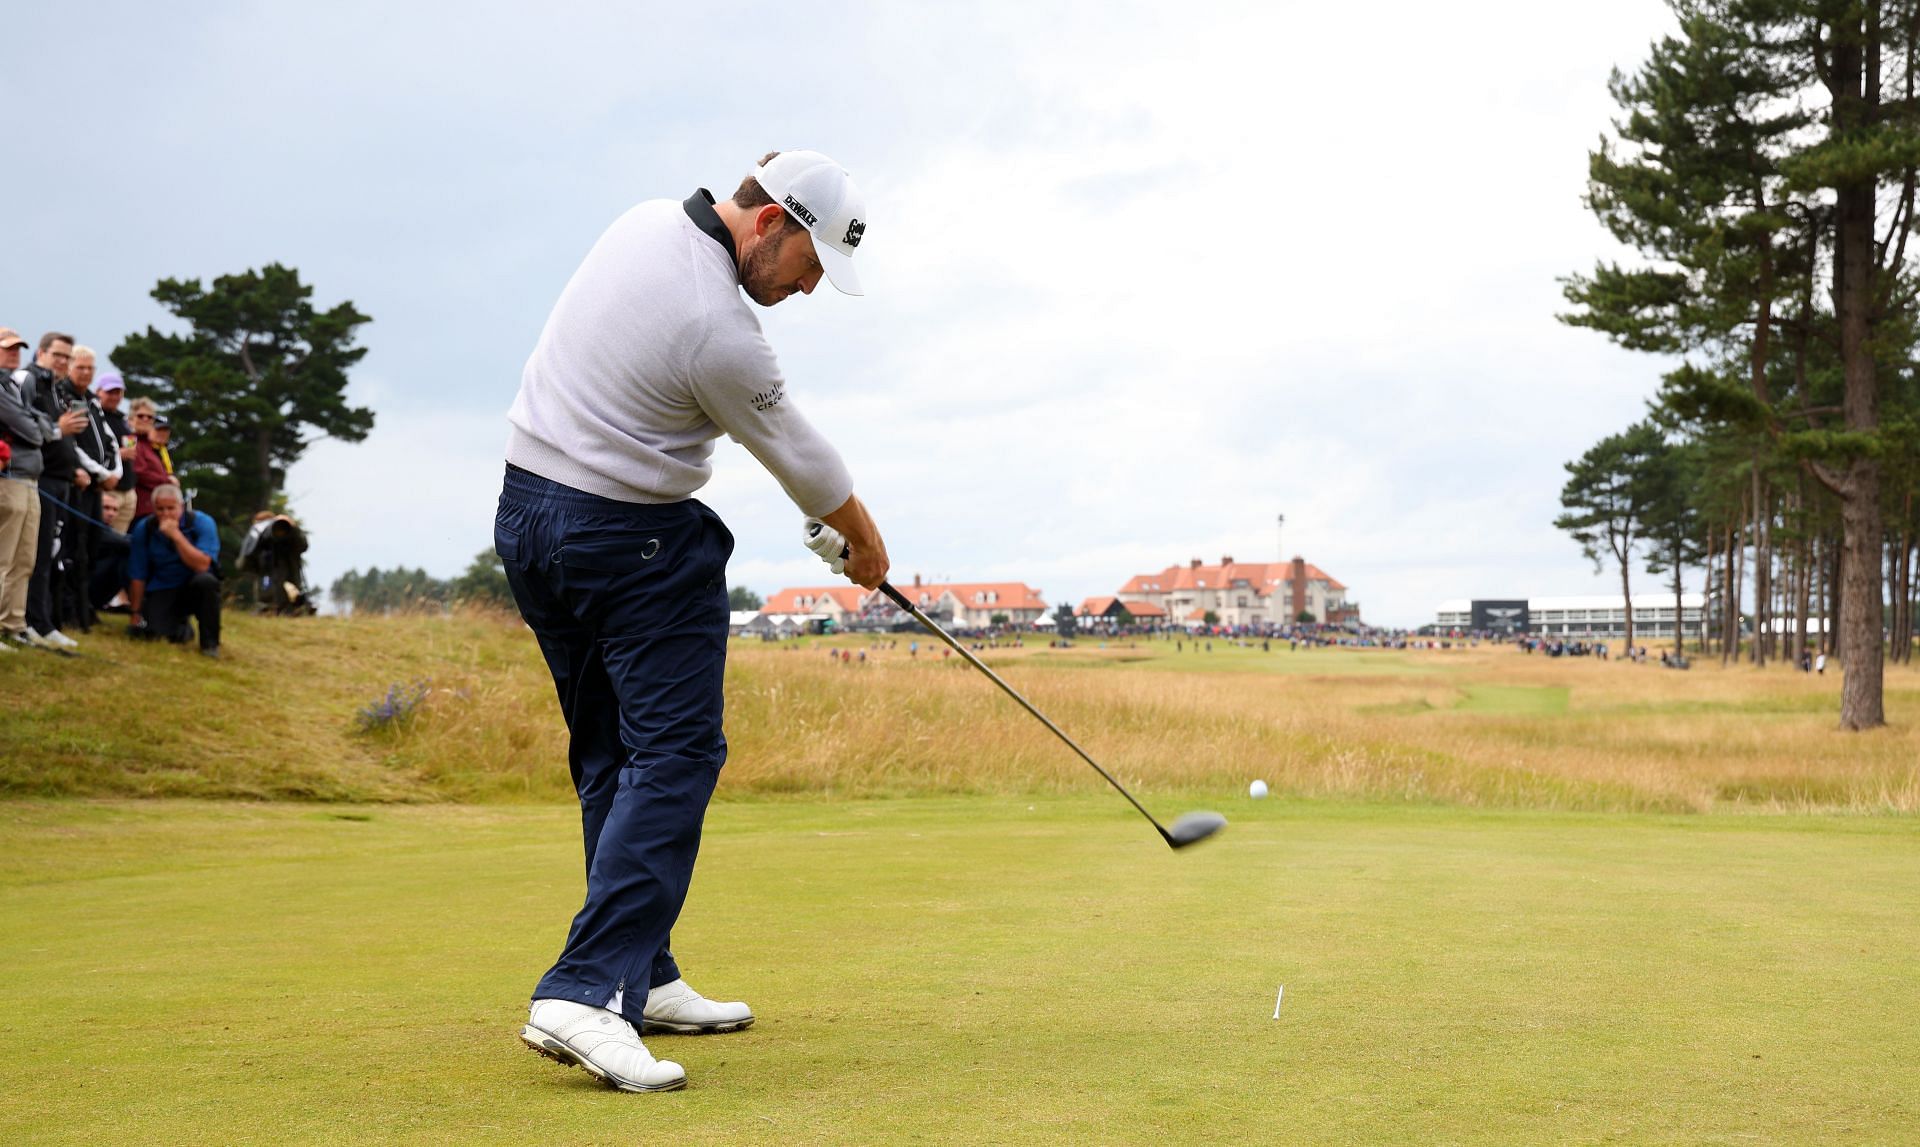 Patrick Cantlay at Genesis Scottish Open - Day Two (Image via Getty)